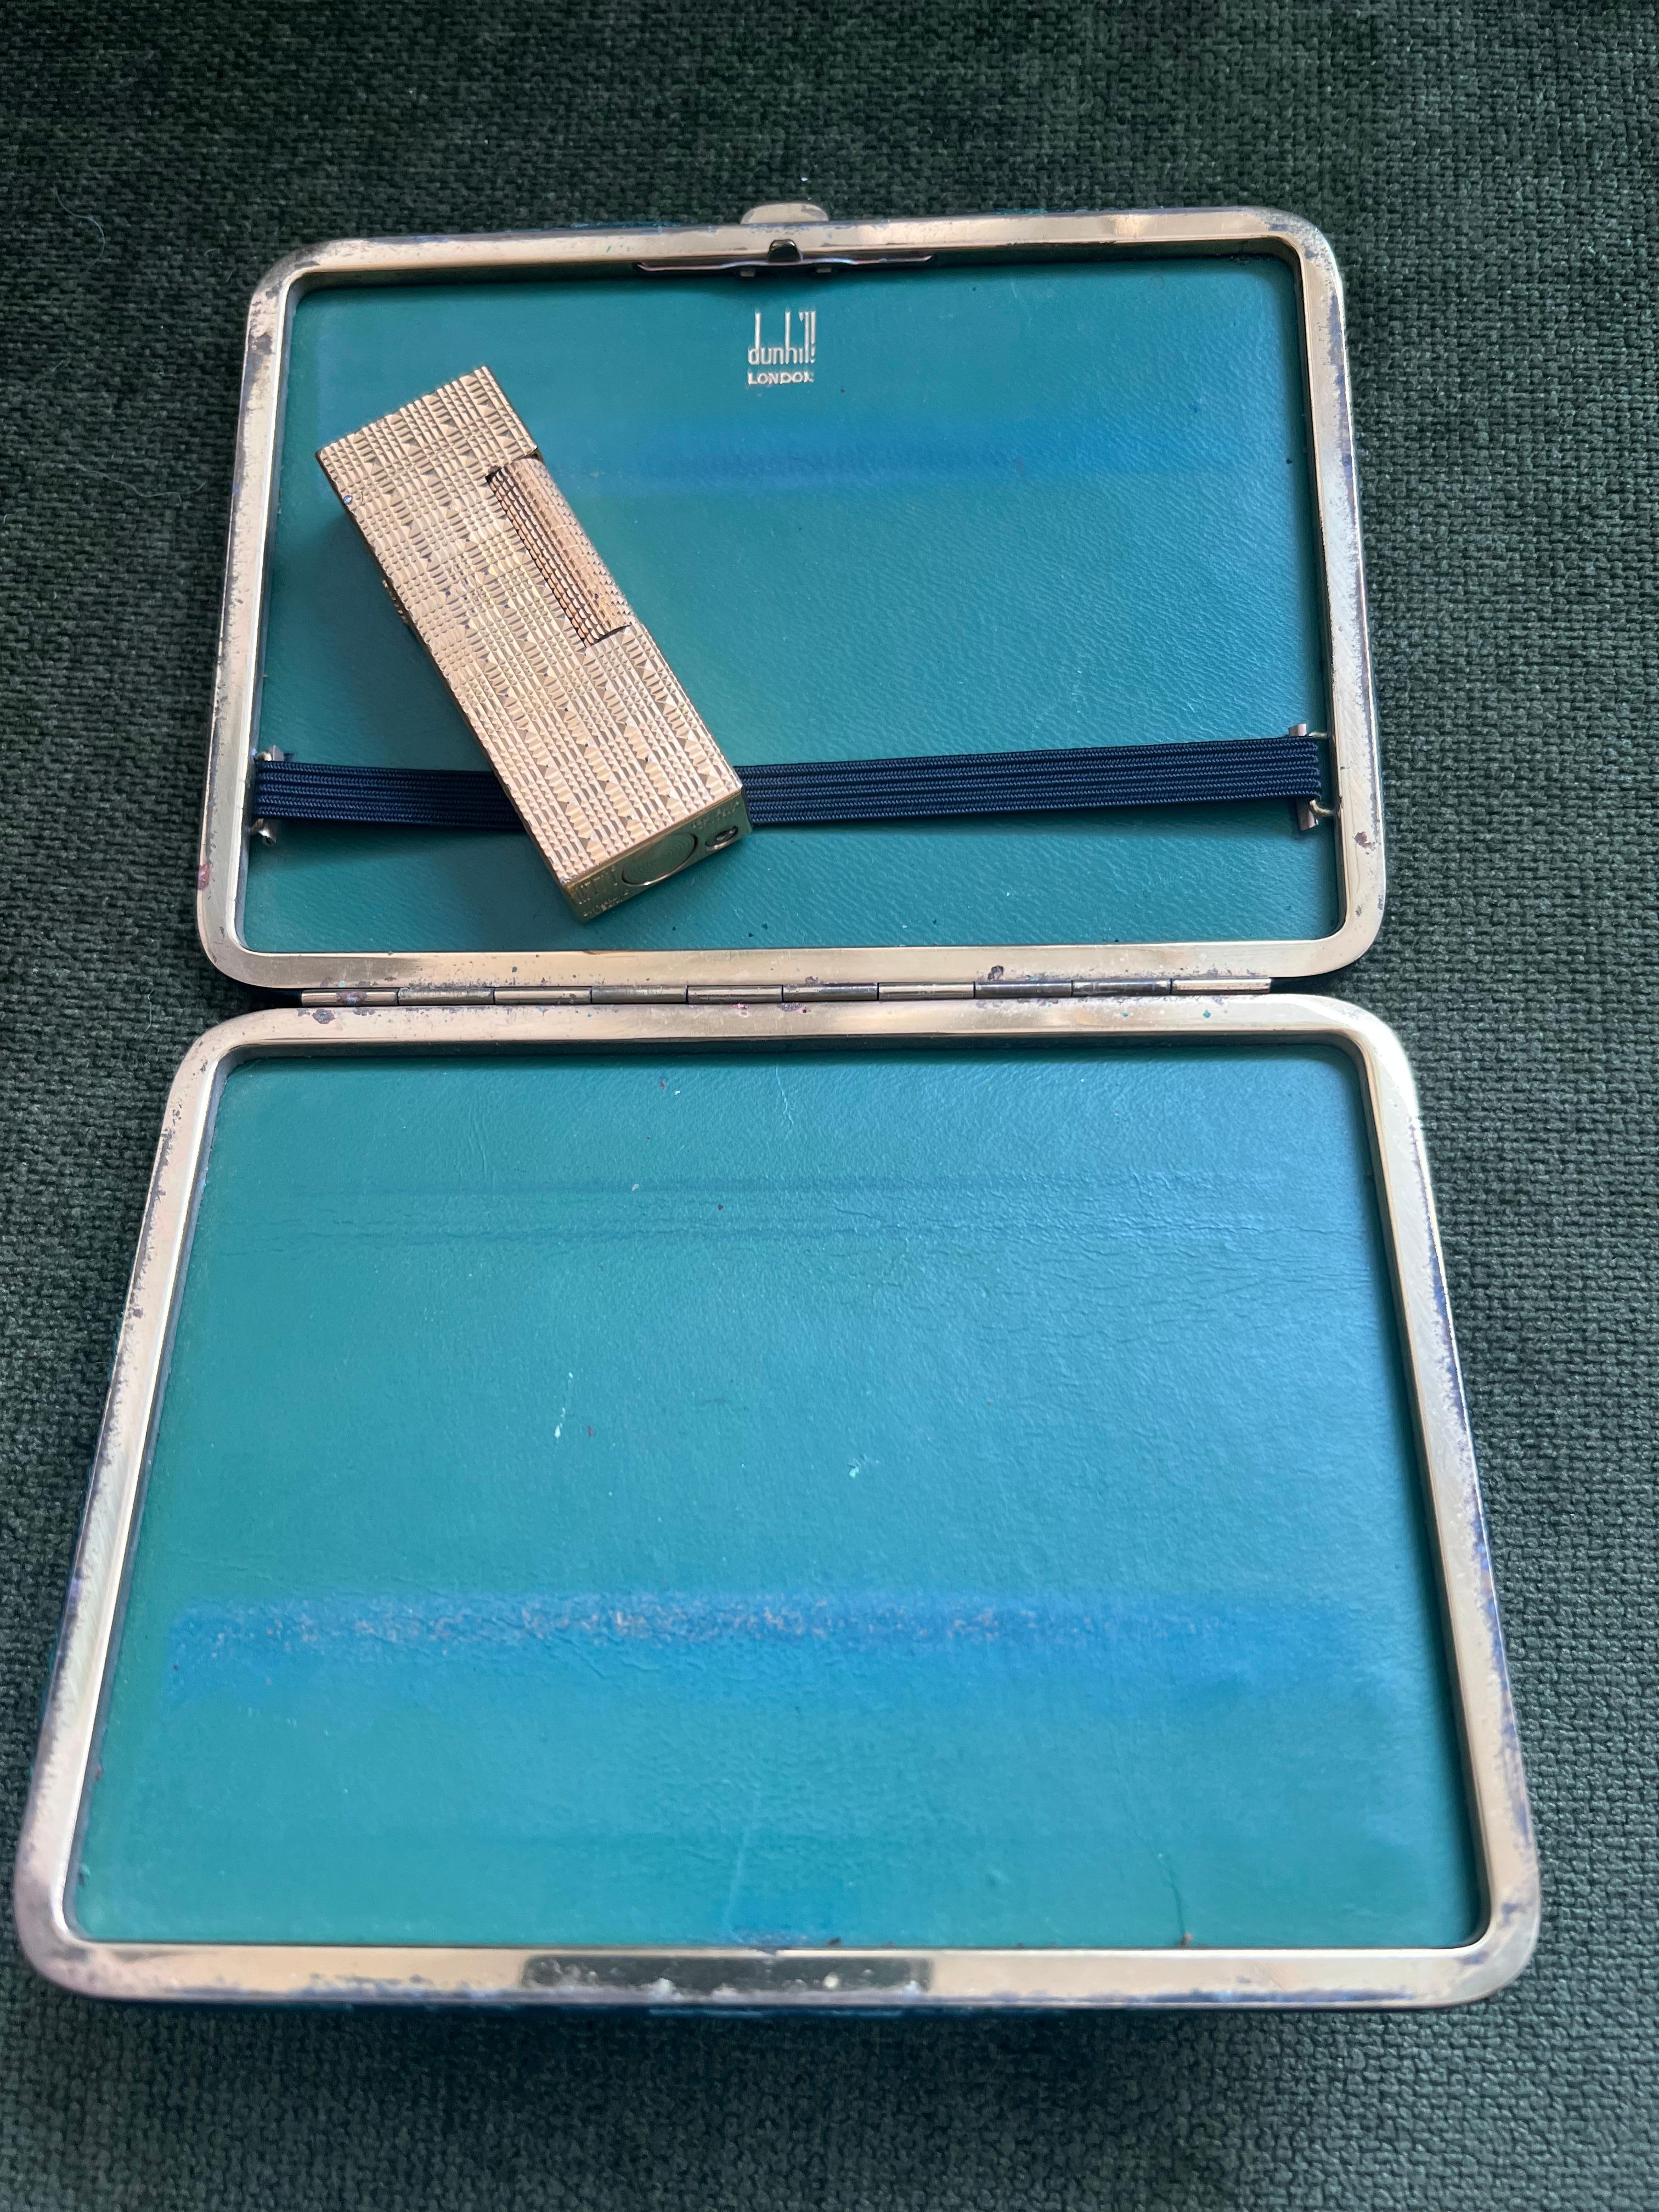 Vintage & Rare Dunhill Cigarette Case & Dunhill Gold Lighter Set, Circa 1970 In Excellent Condition For Sale In New York, NY